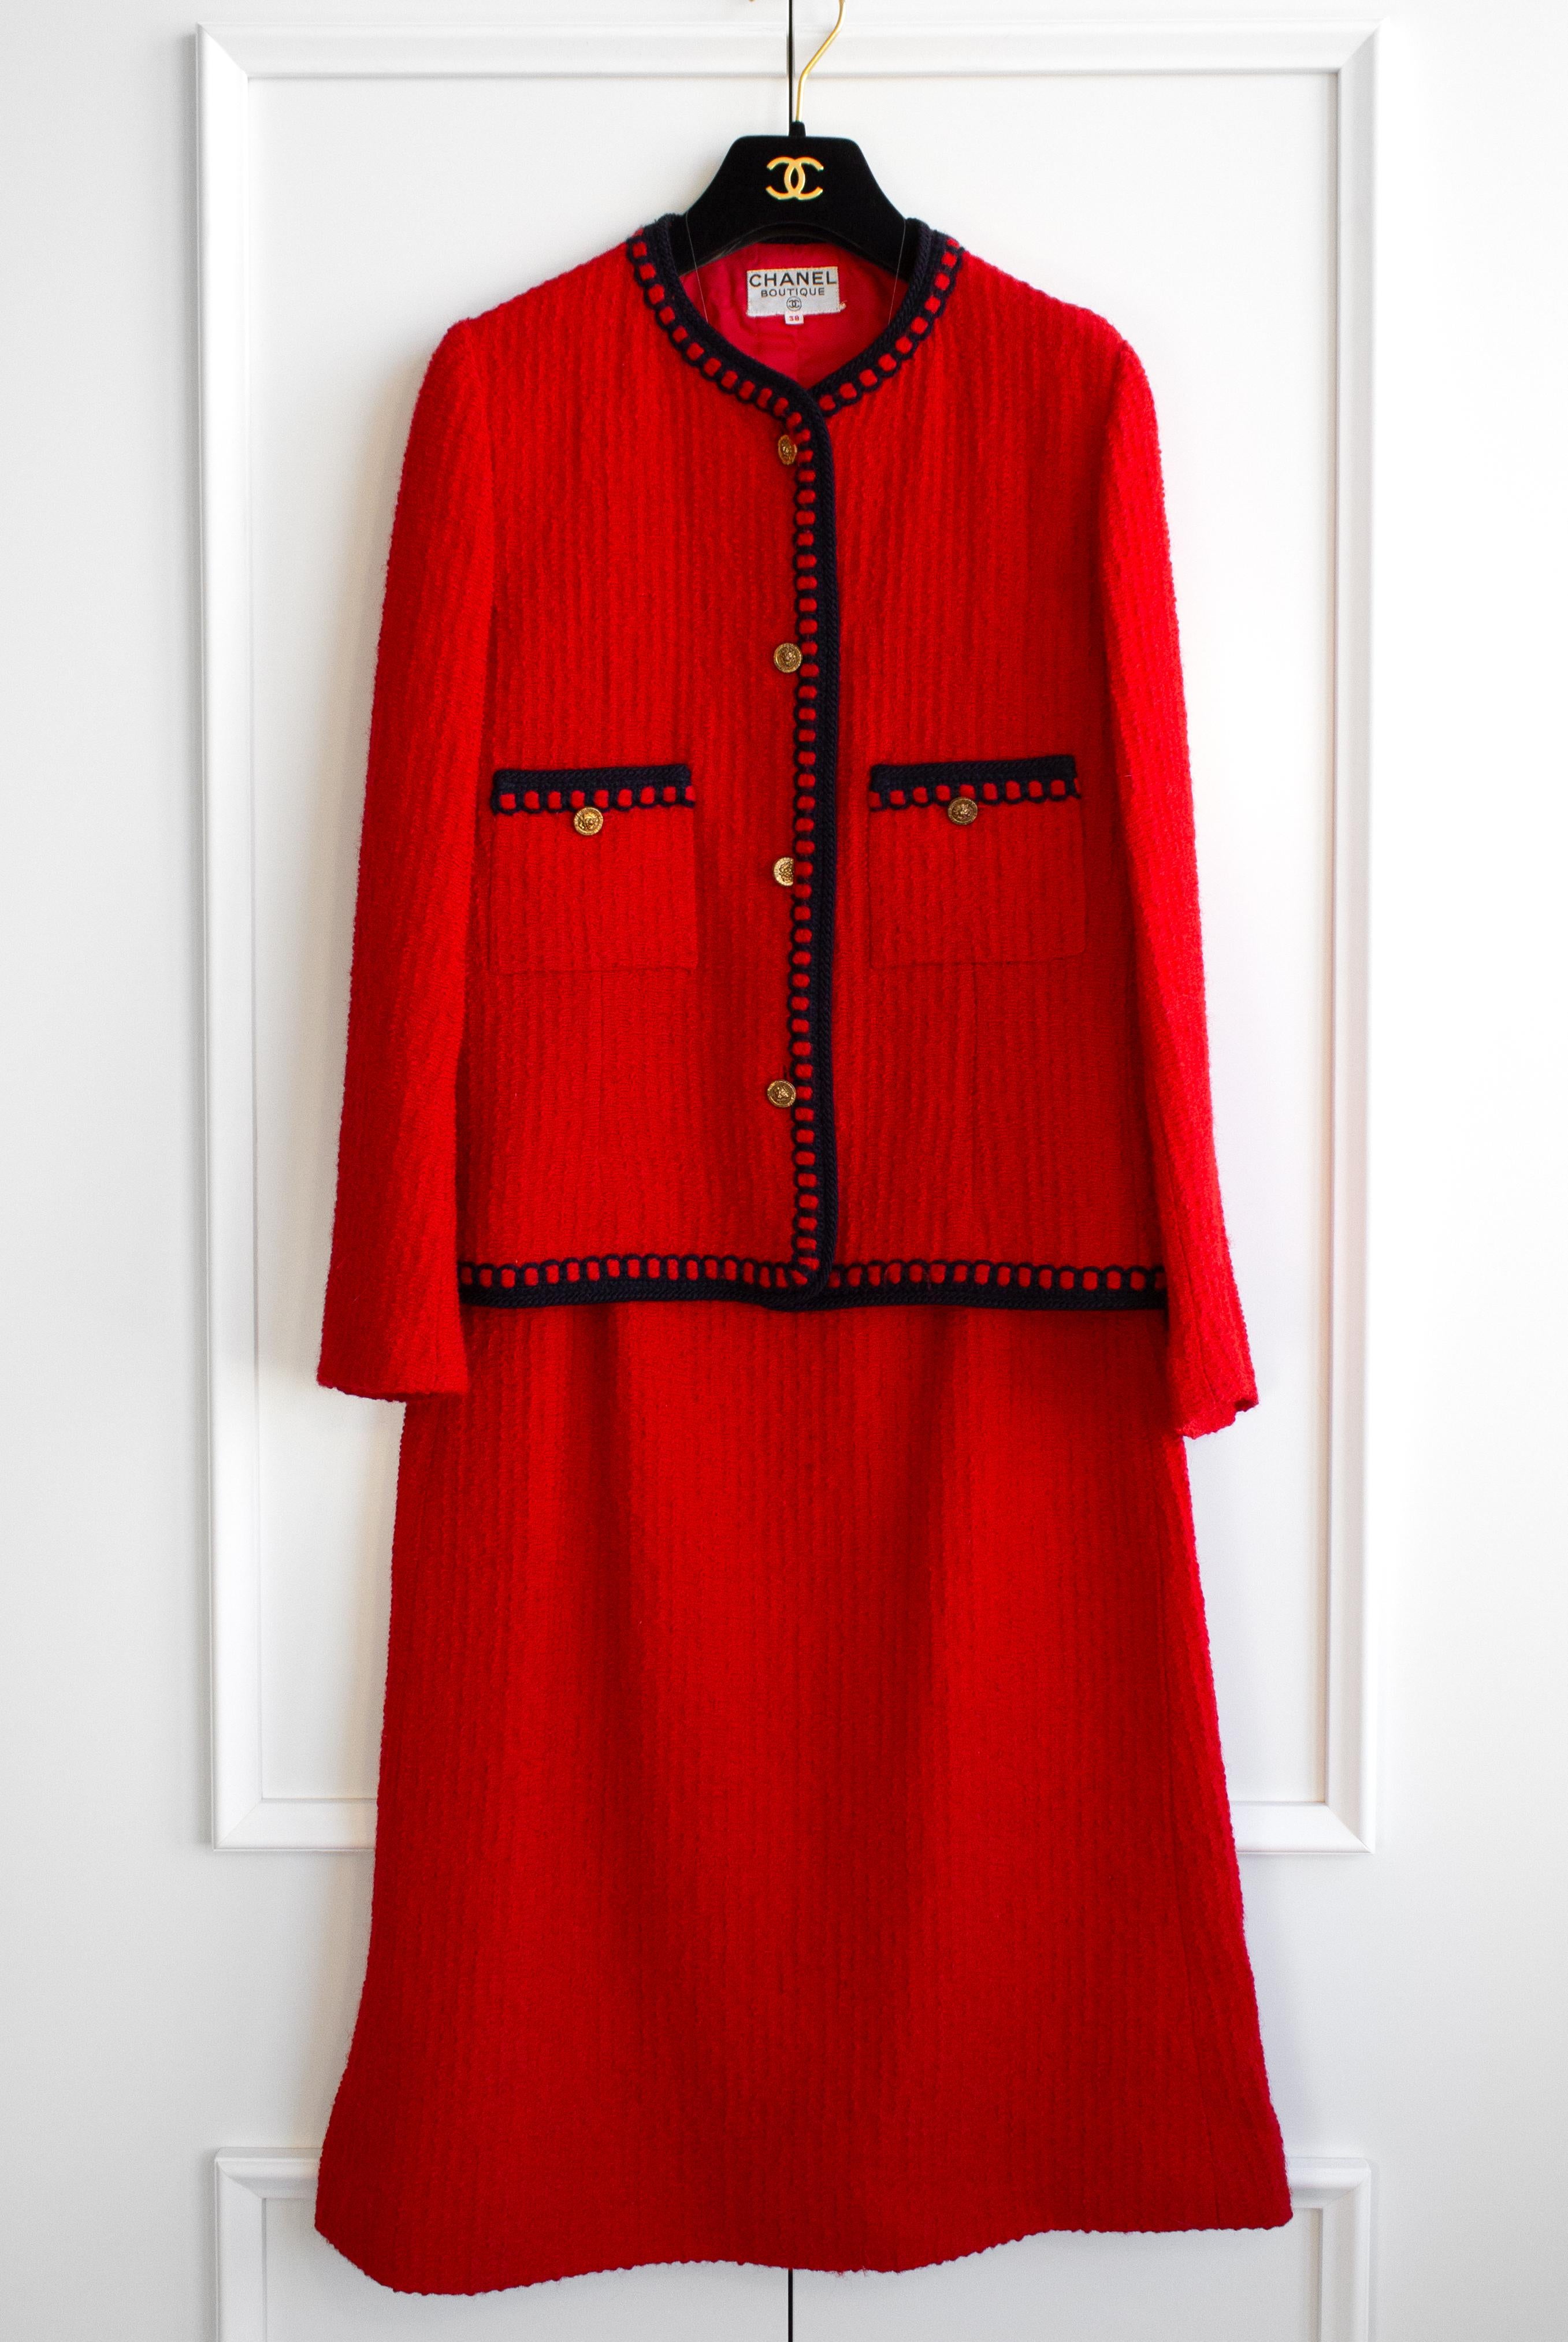 Chanel Vintage 1981 Parisian Red Gold Lion Tweed Jacket Skirt Suit In Good Condition For Sale In Jersey City, NJ